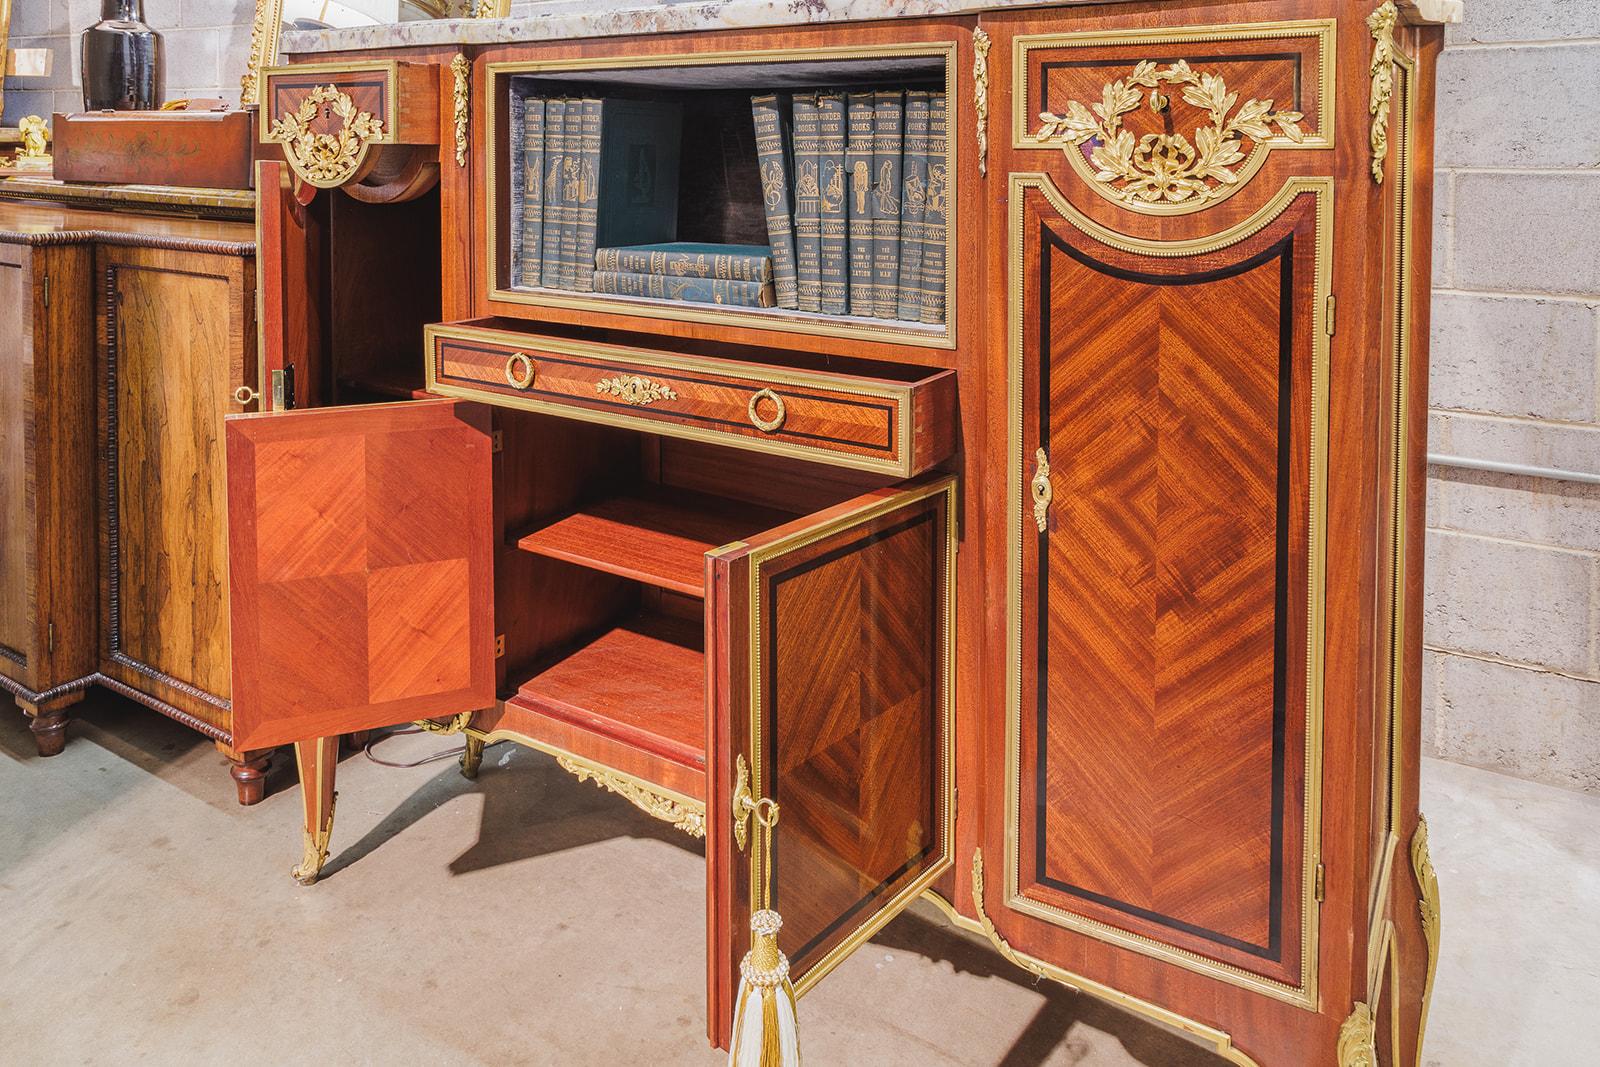 A very fine late 19th century French Louis XVI kingwood parquetry inlayed bookcase cabinet . Fine gilt bronze mounts and detail . Original Breche Violette marble top. 